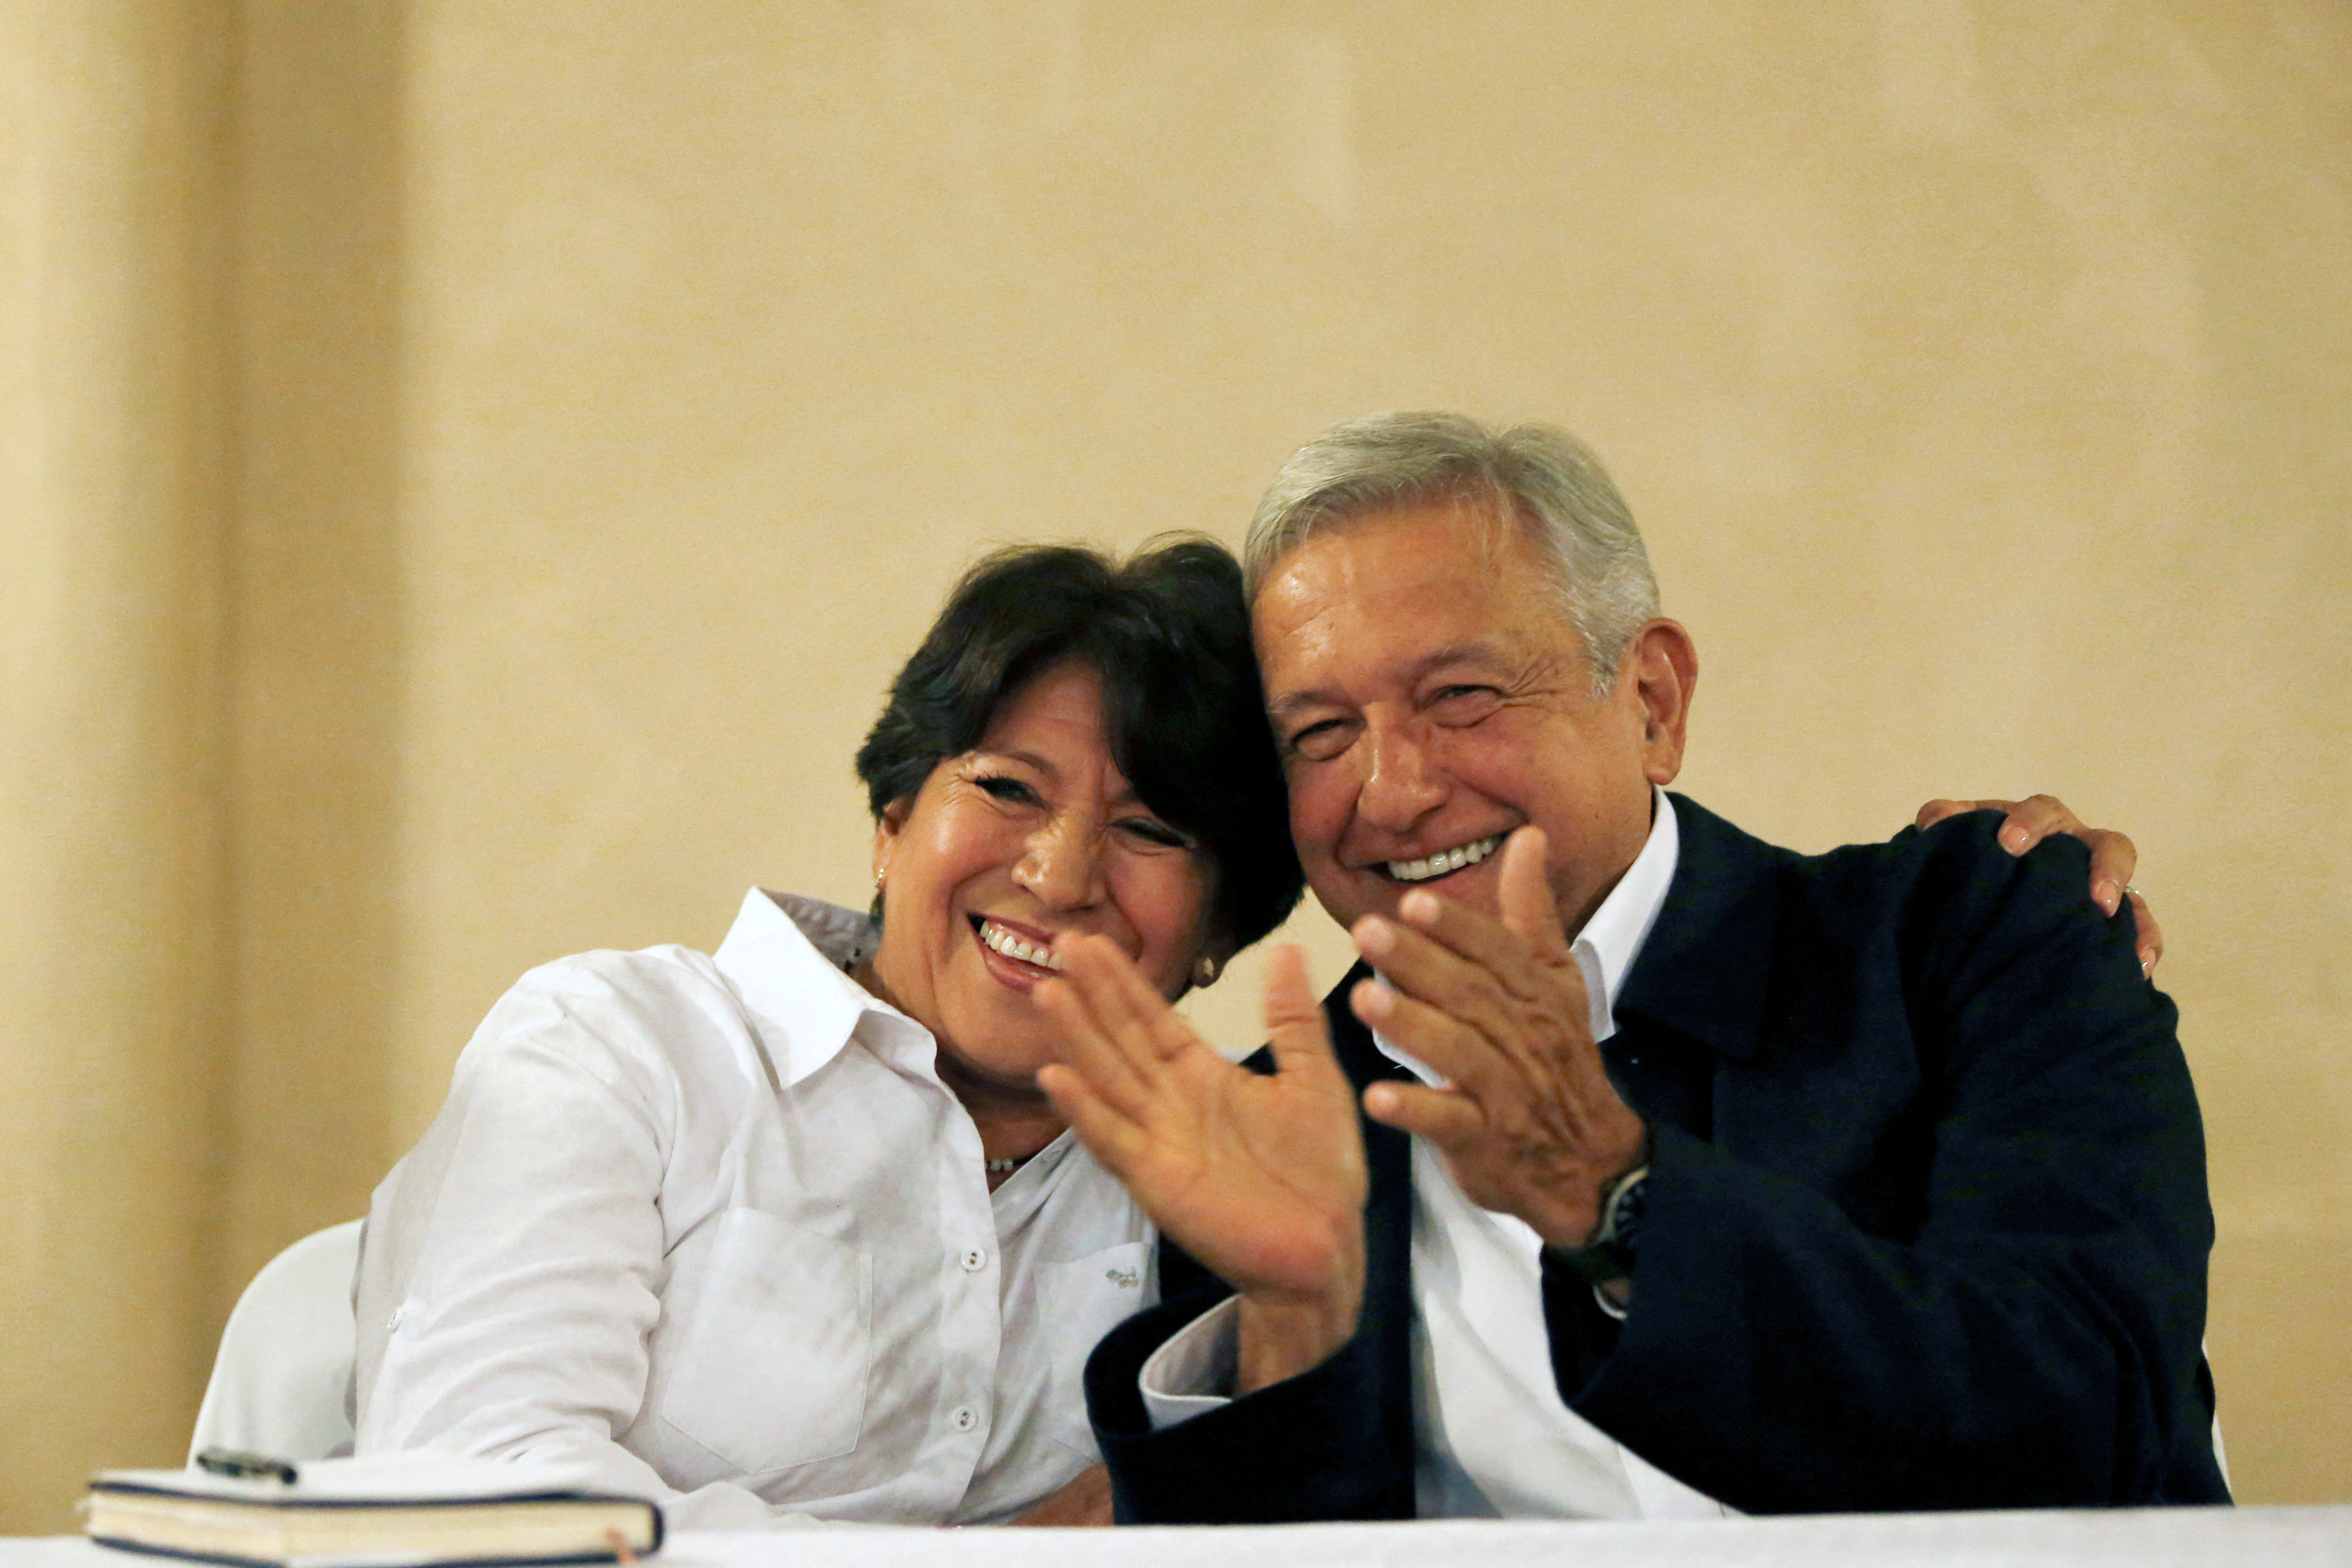 Delfina Gomez of MORENA, candidate for the governor of the State of Mexico, smiles next to Andres Manuel Lopez Obrador, leader of MORENA during a news conference in Mexico City